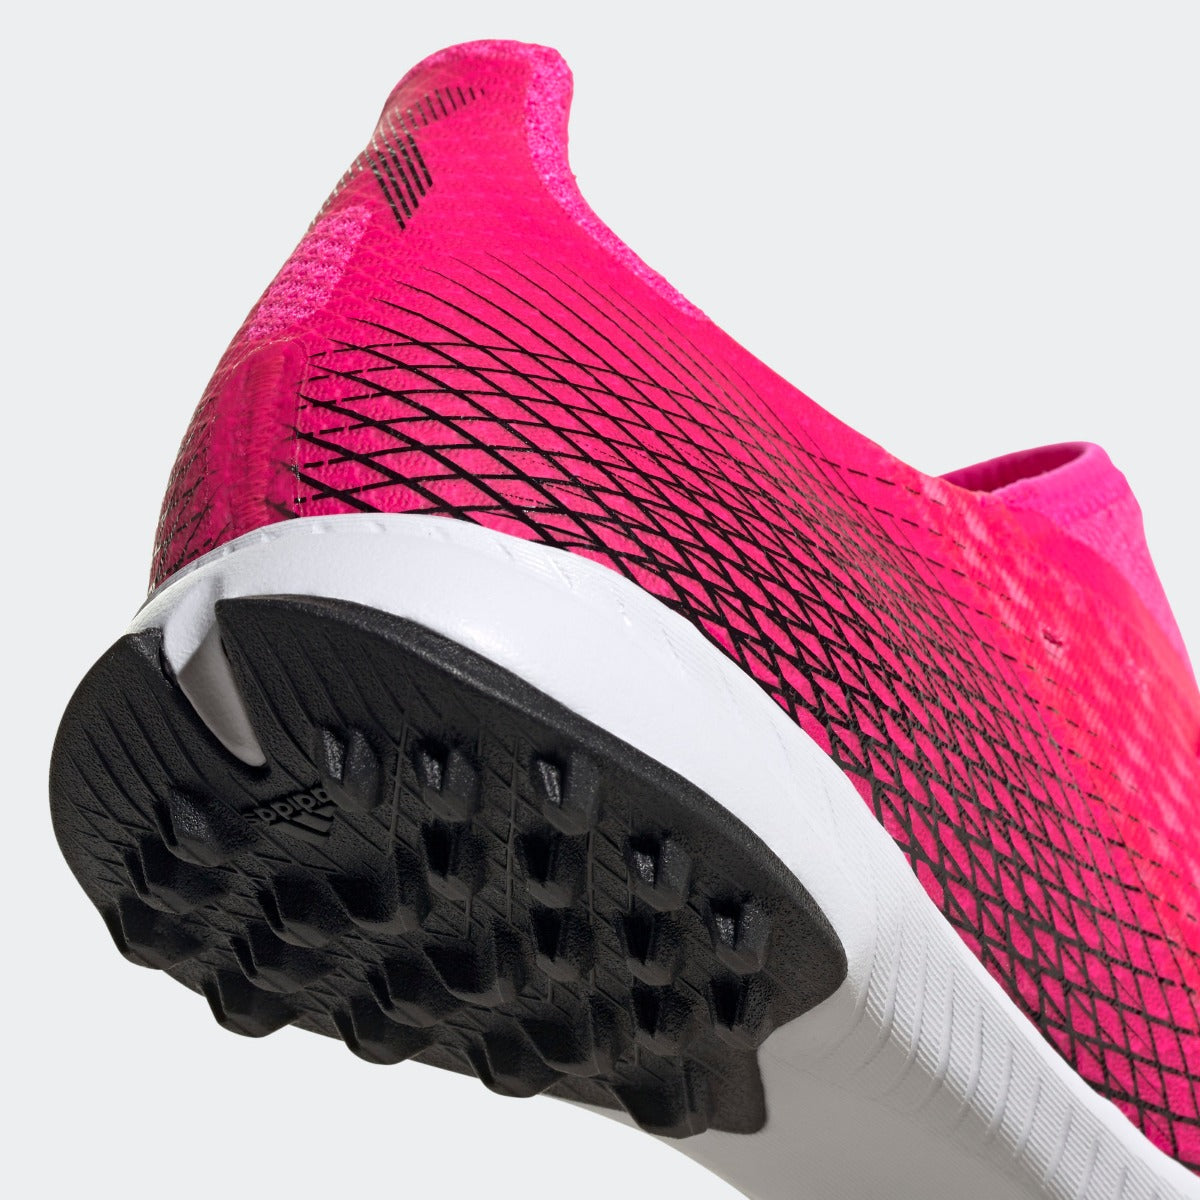 Adidas X Ghosted .3 TF - Pink-Black (Detail 2)